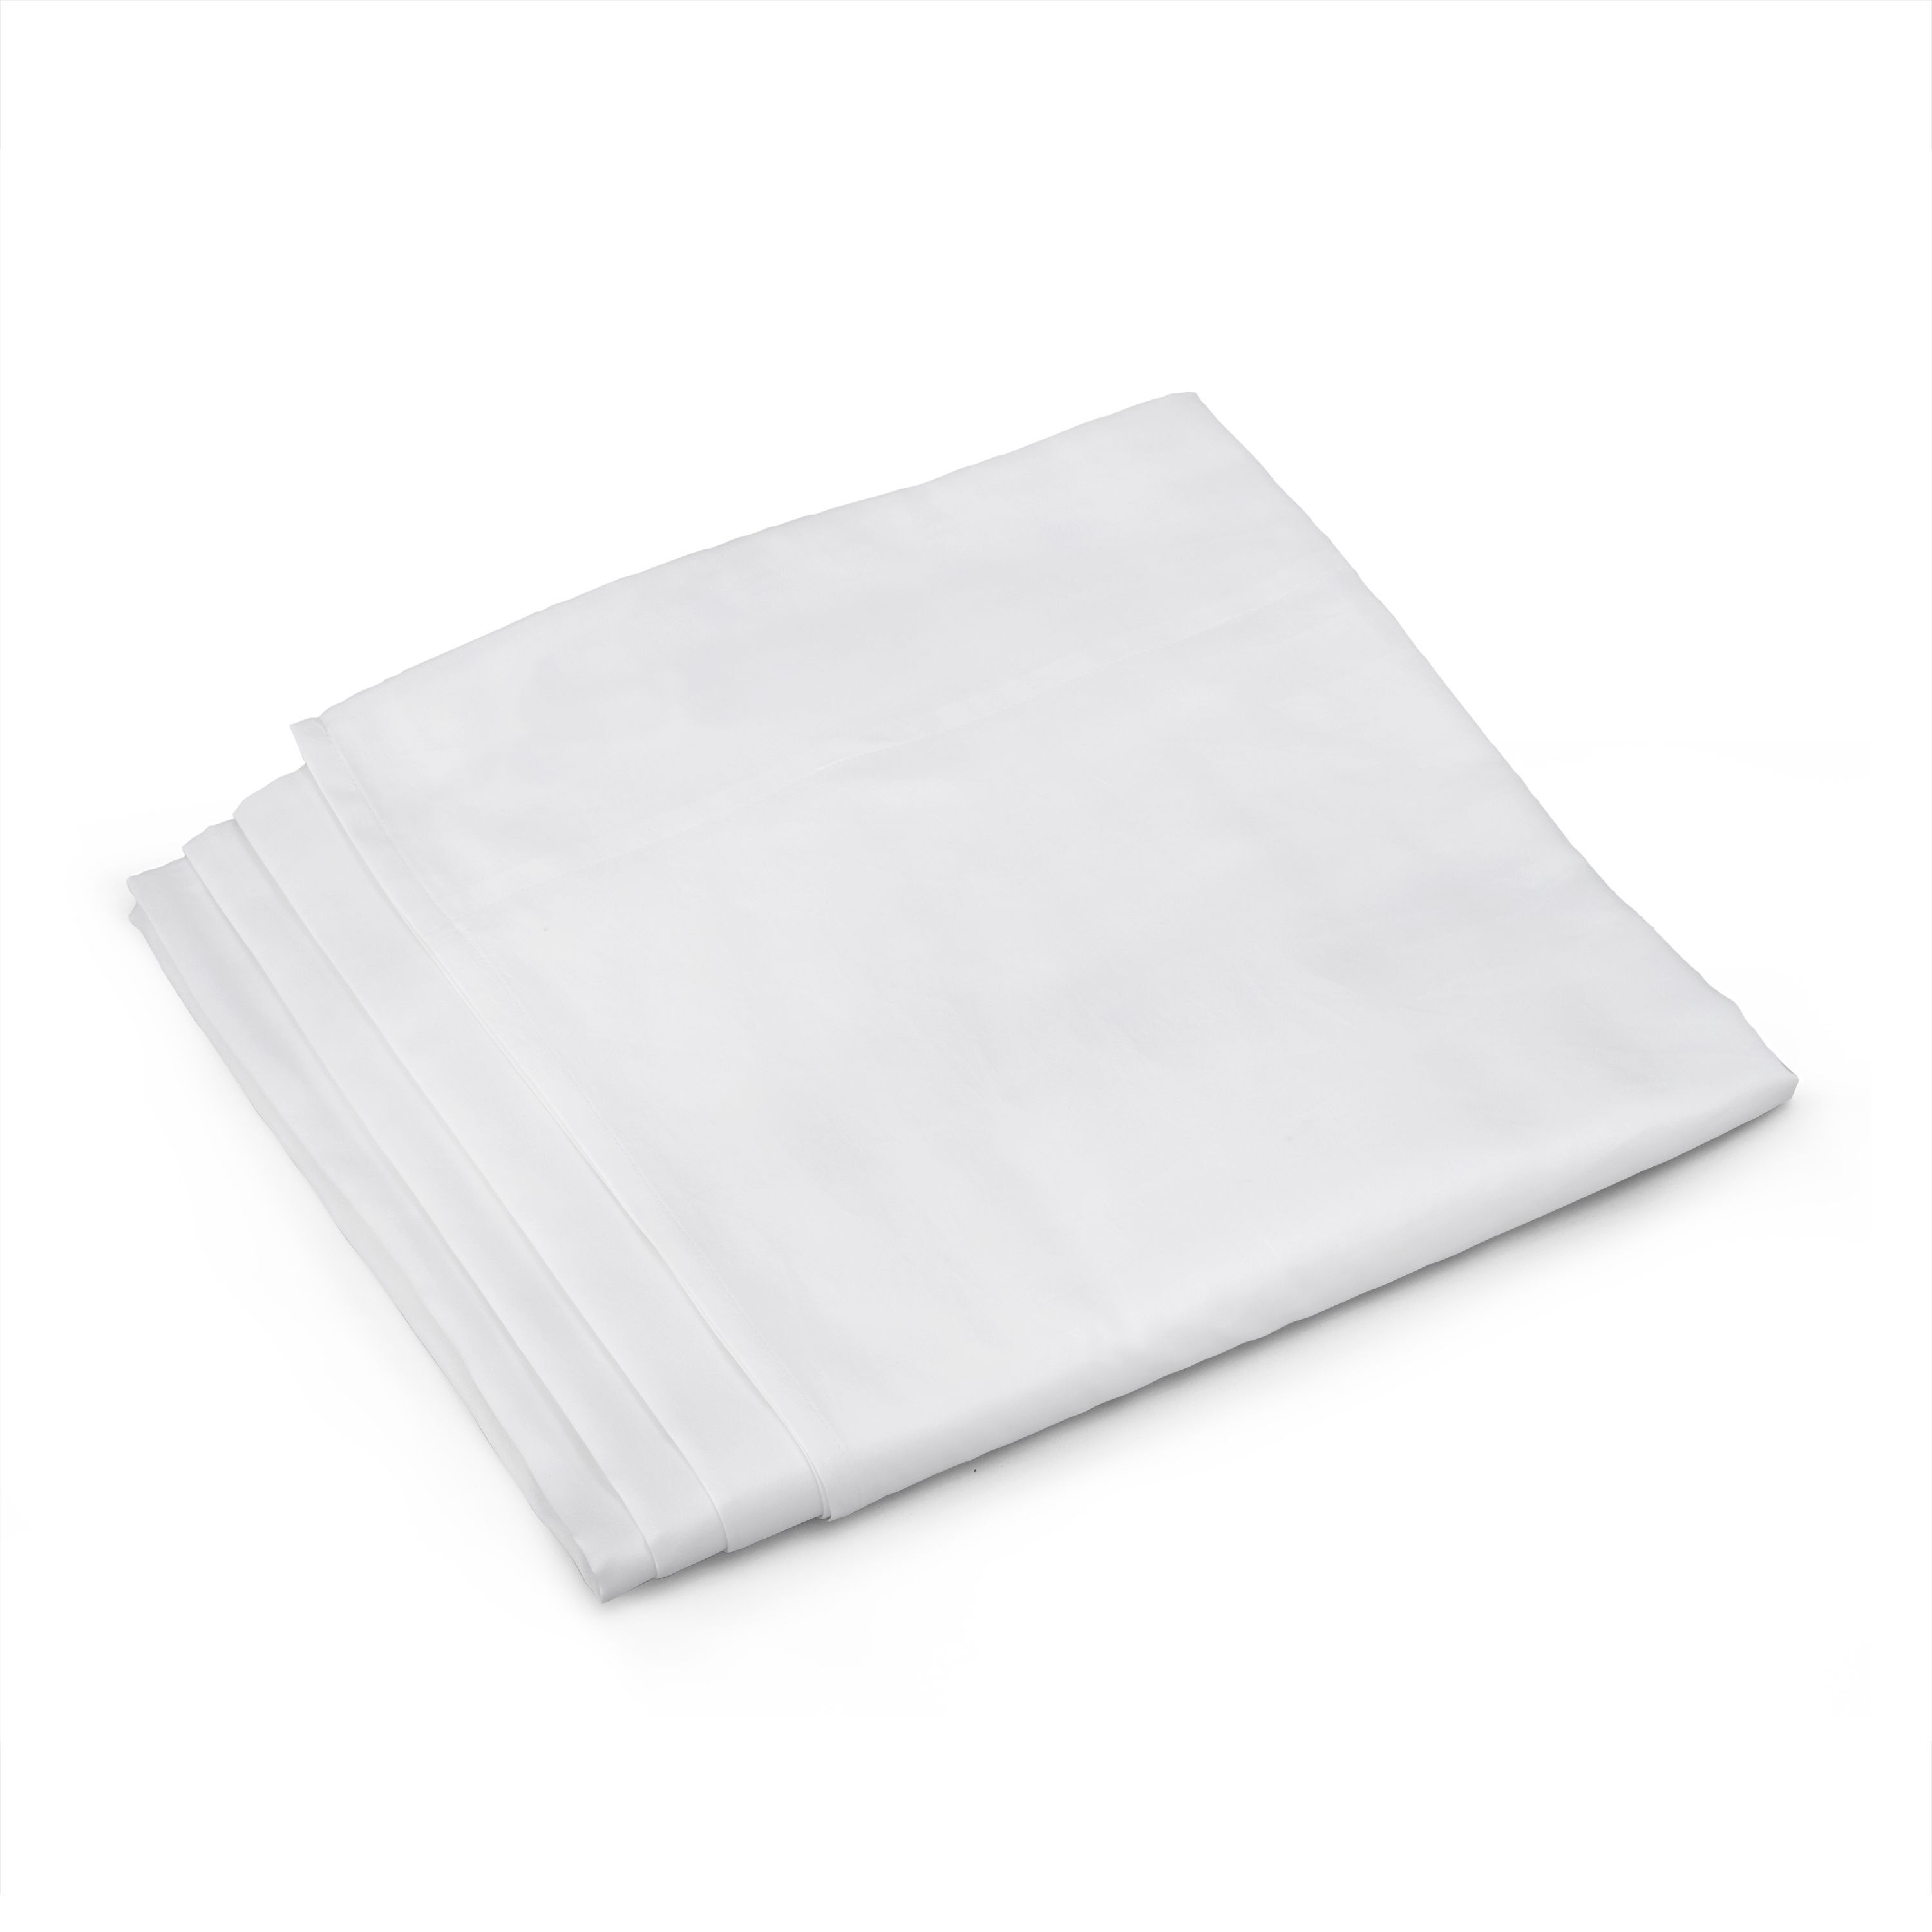 Hotel Collection Sateen Flat Sheet - image 1